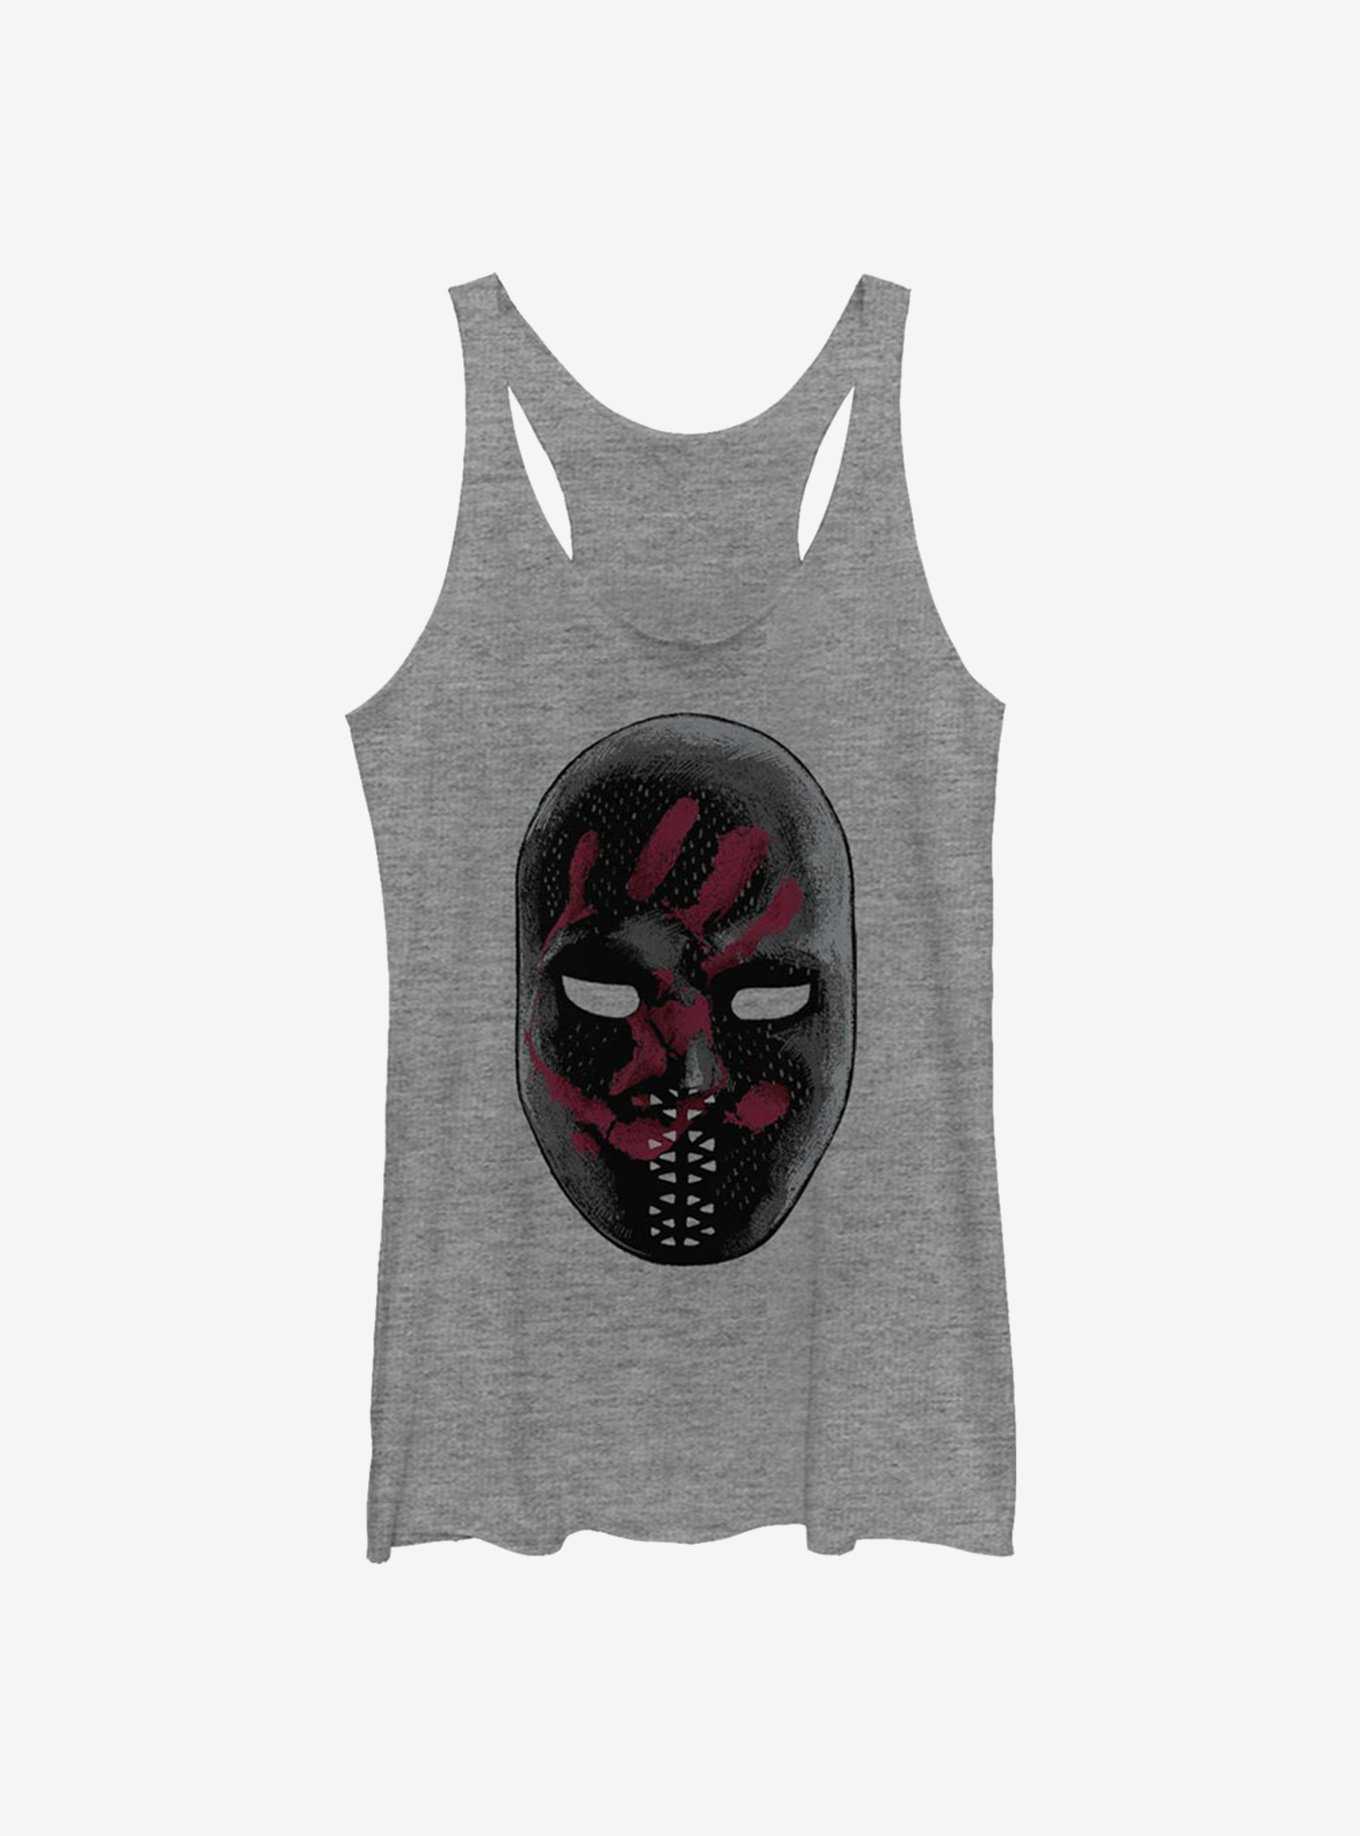 Marvel The Falcon And The Winter Soldier Flag Smashers Mask Girls Tank, , hi-res